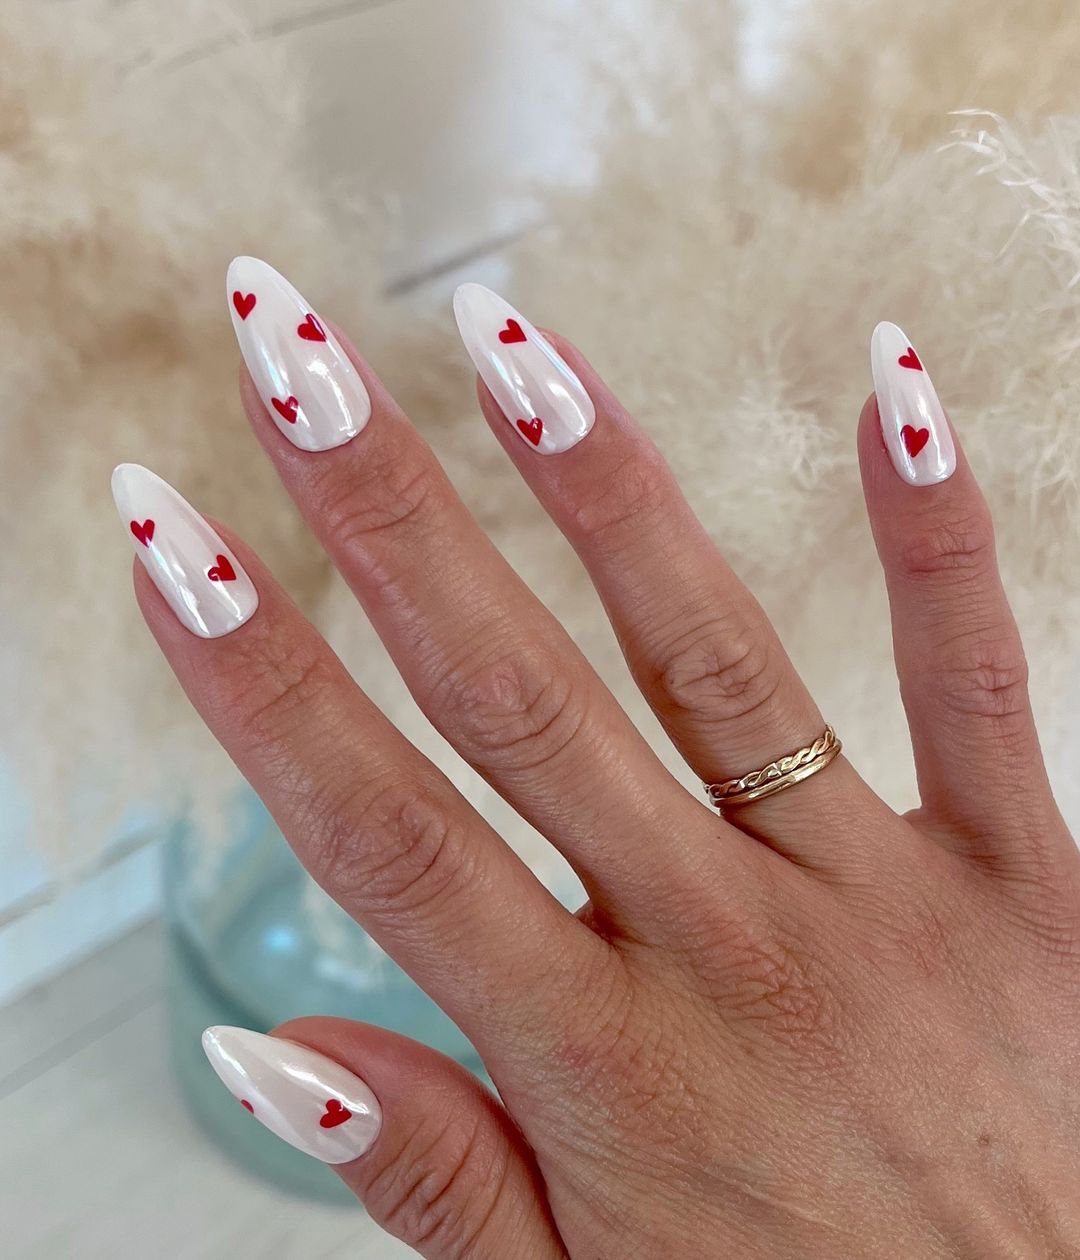 Milky White Nails With Hearts